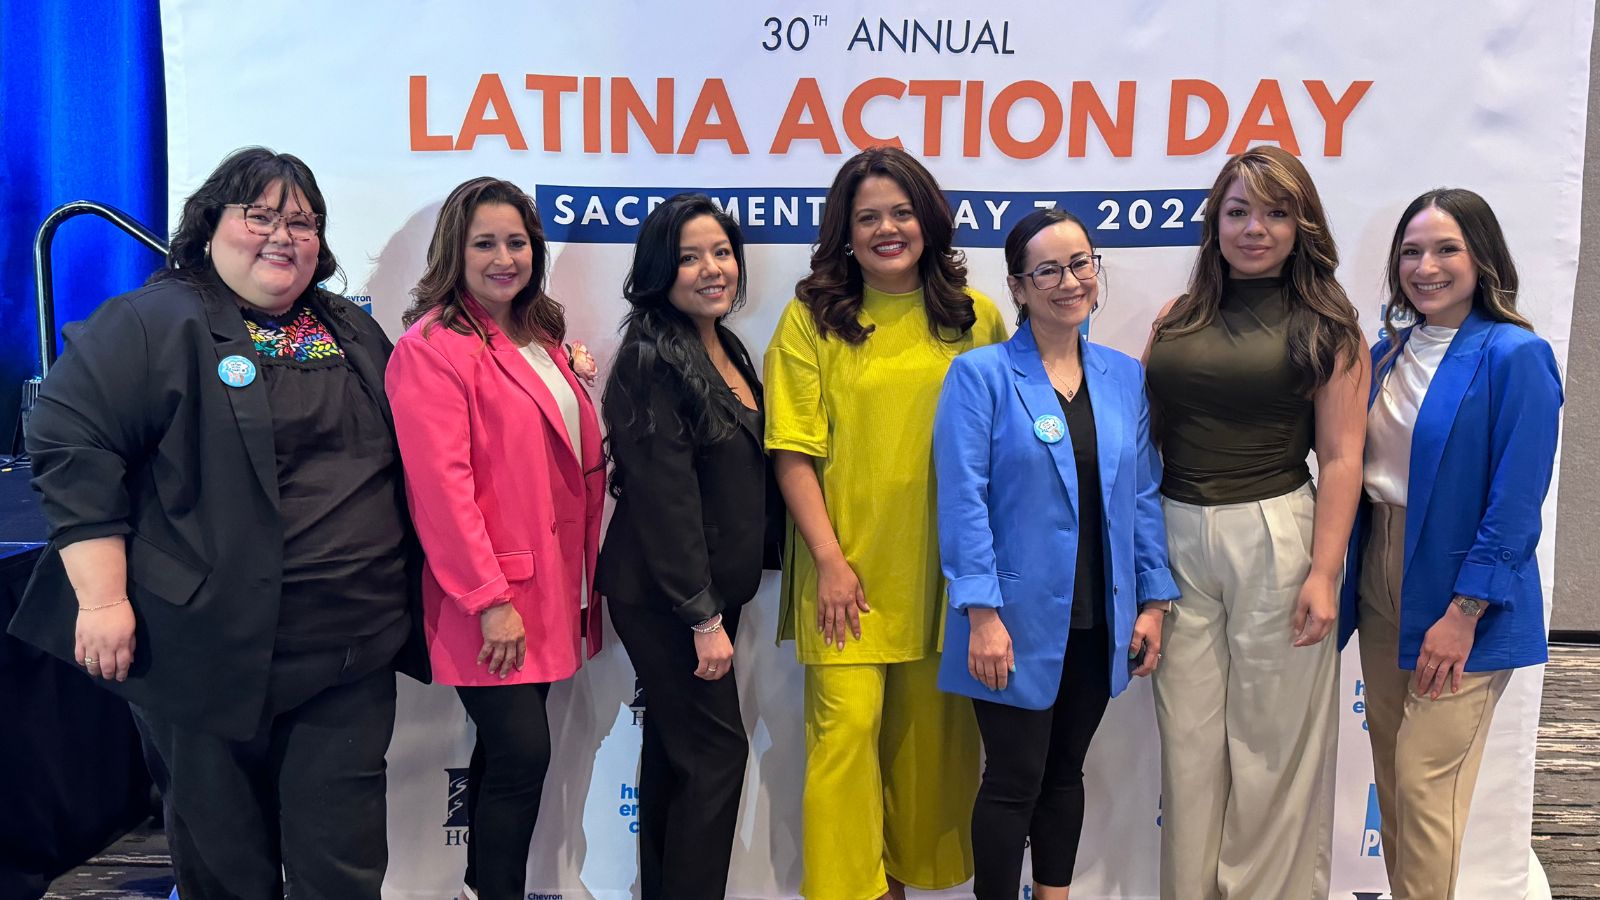 HOPE in Action: Comcast Proudly Supports the 30th Annual Latina Action Day